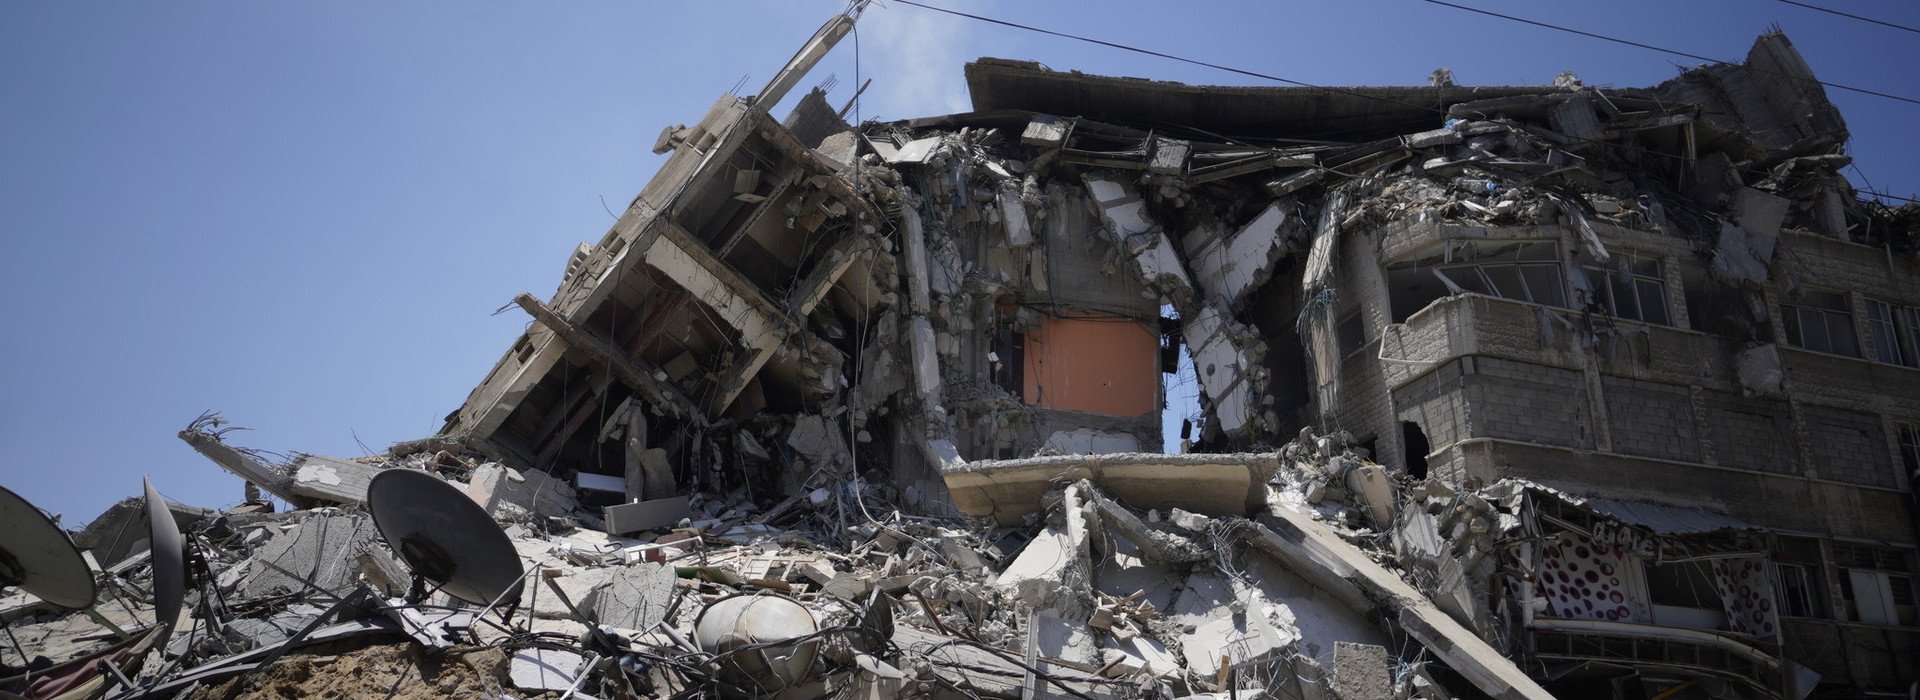 The Hanada building in Gaza was flattened by Israeli airstrikes on 11th May 2021. The building hosted tech startups, affecting businesses and Palestinians’ livelihoods in Gaza.